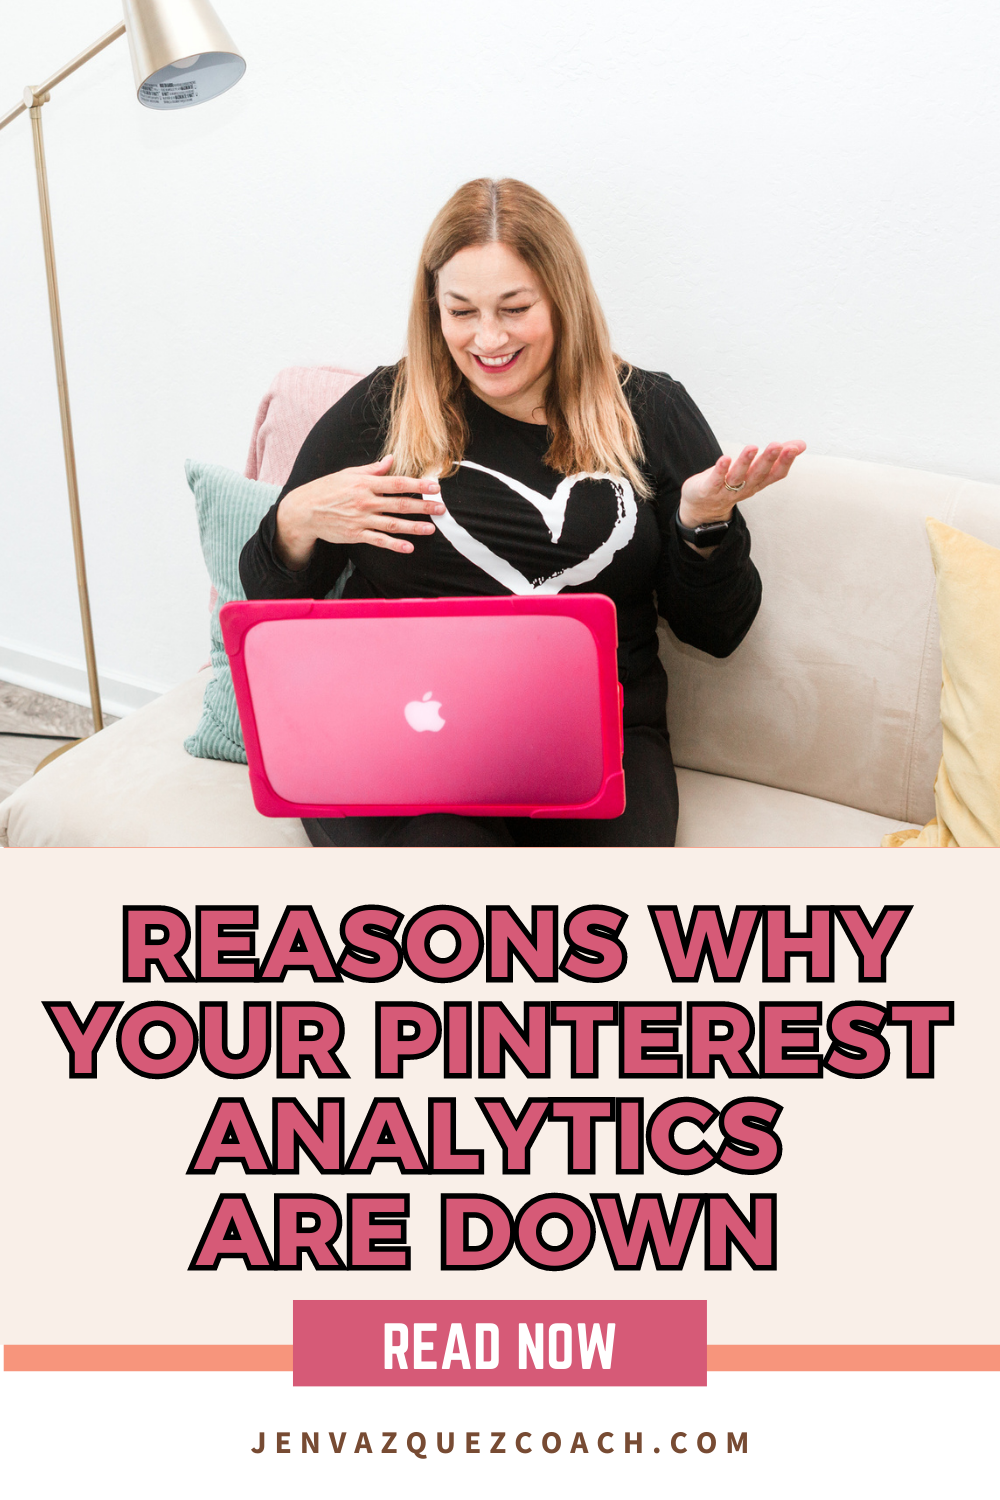 What the heck is going on with Pinterest Analytics: TWO REASONS WHY YOUR STATS ARE DOWN